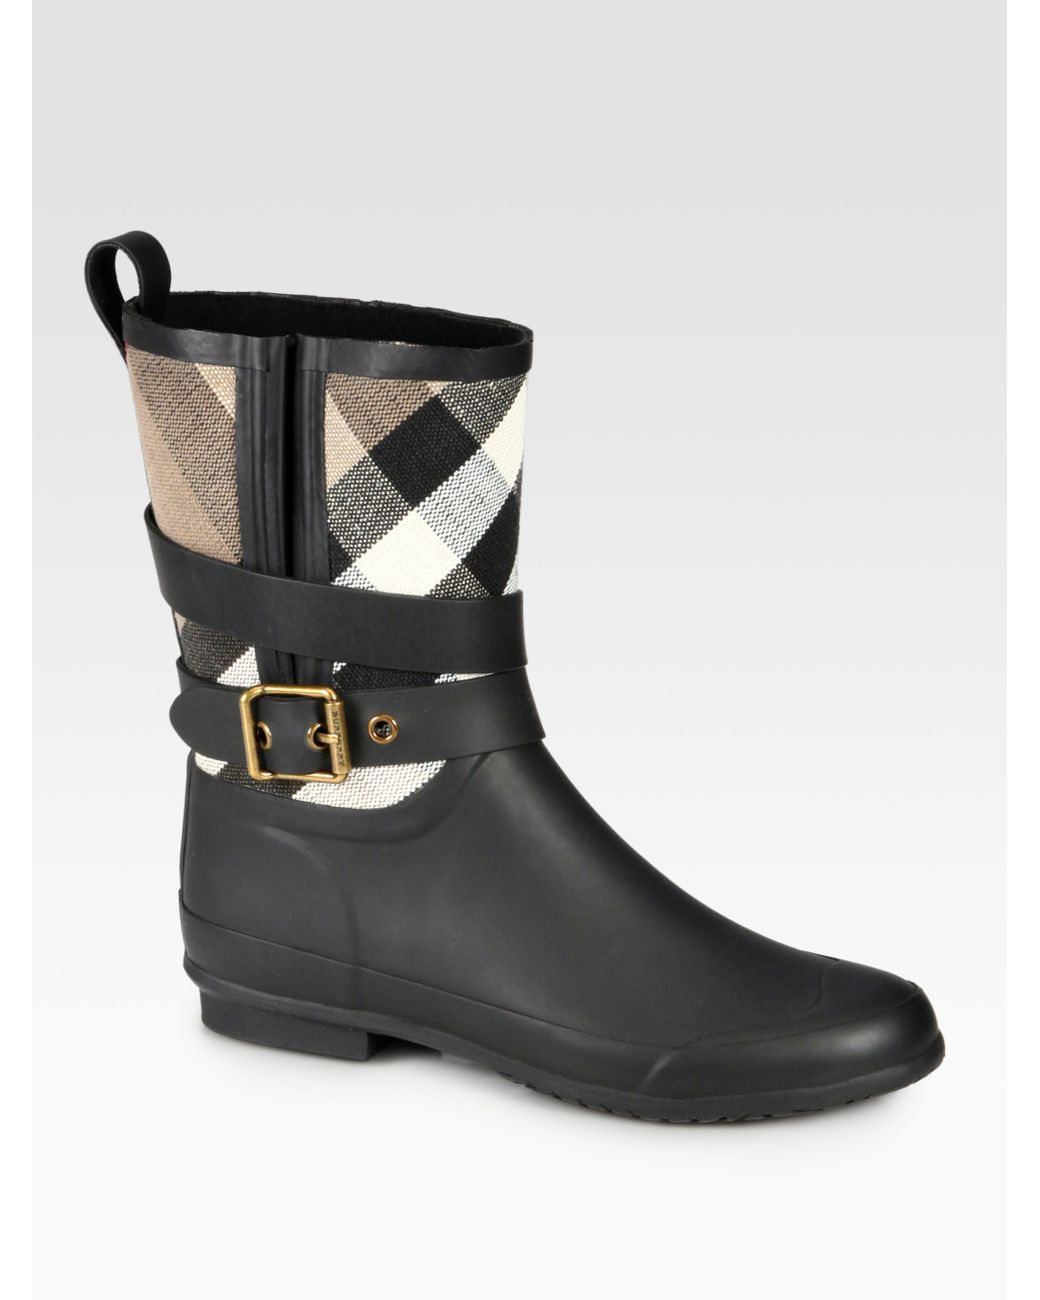 Stay Dry In Holloway Rain Boots: Burberry - Shoe Effect